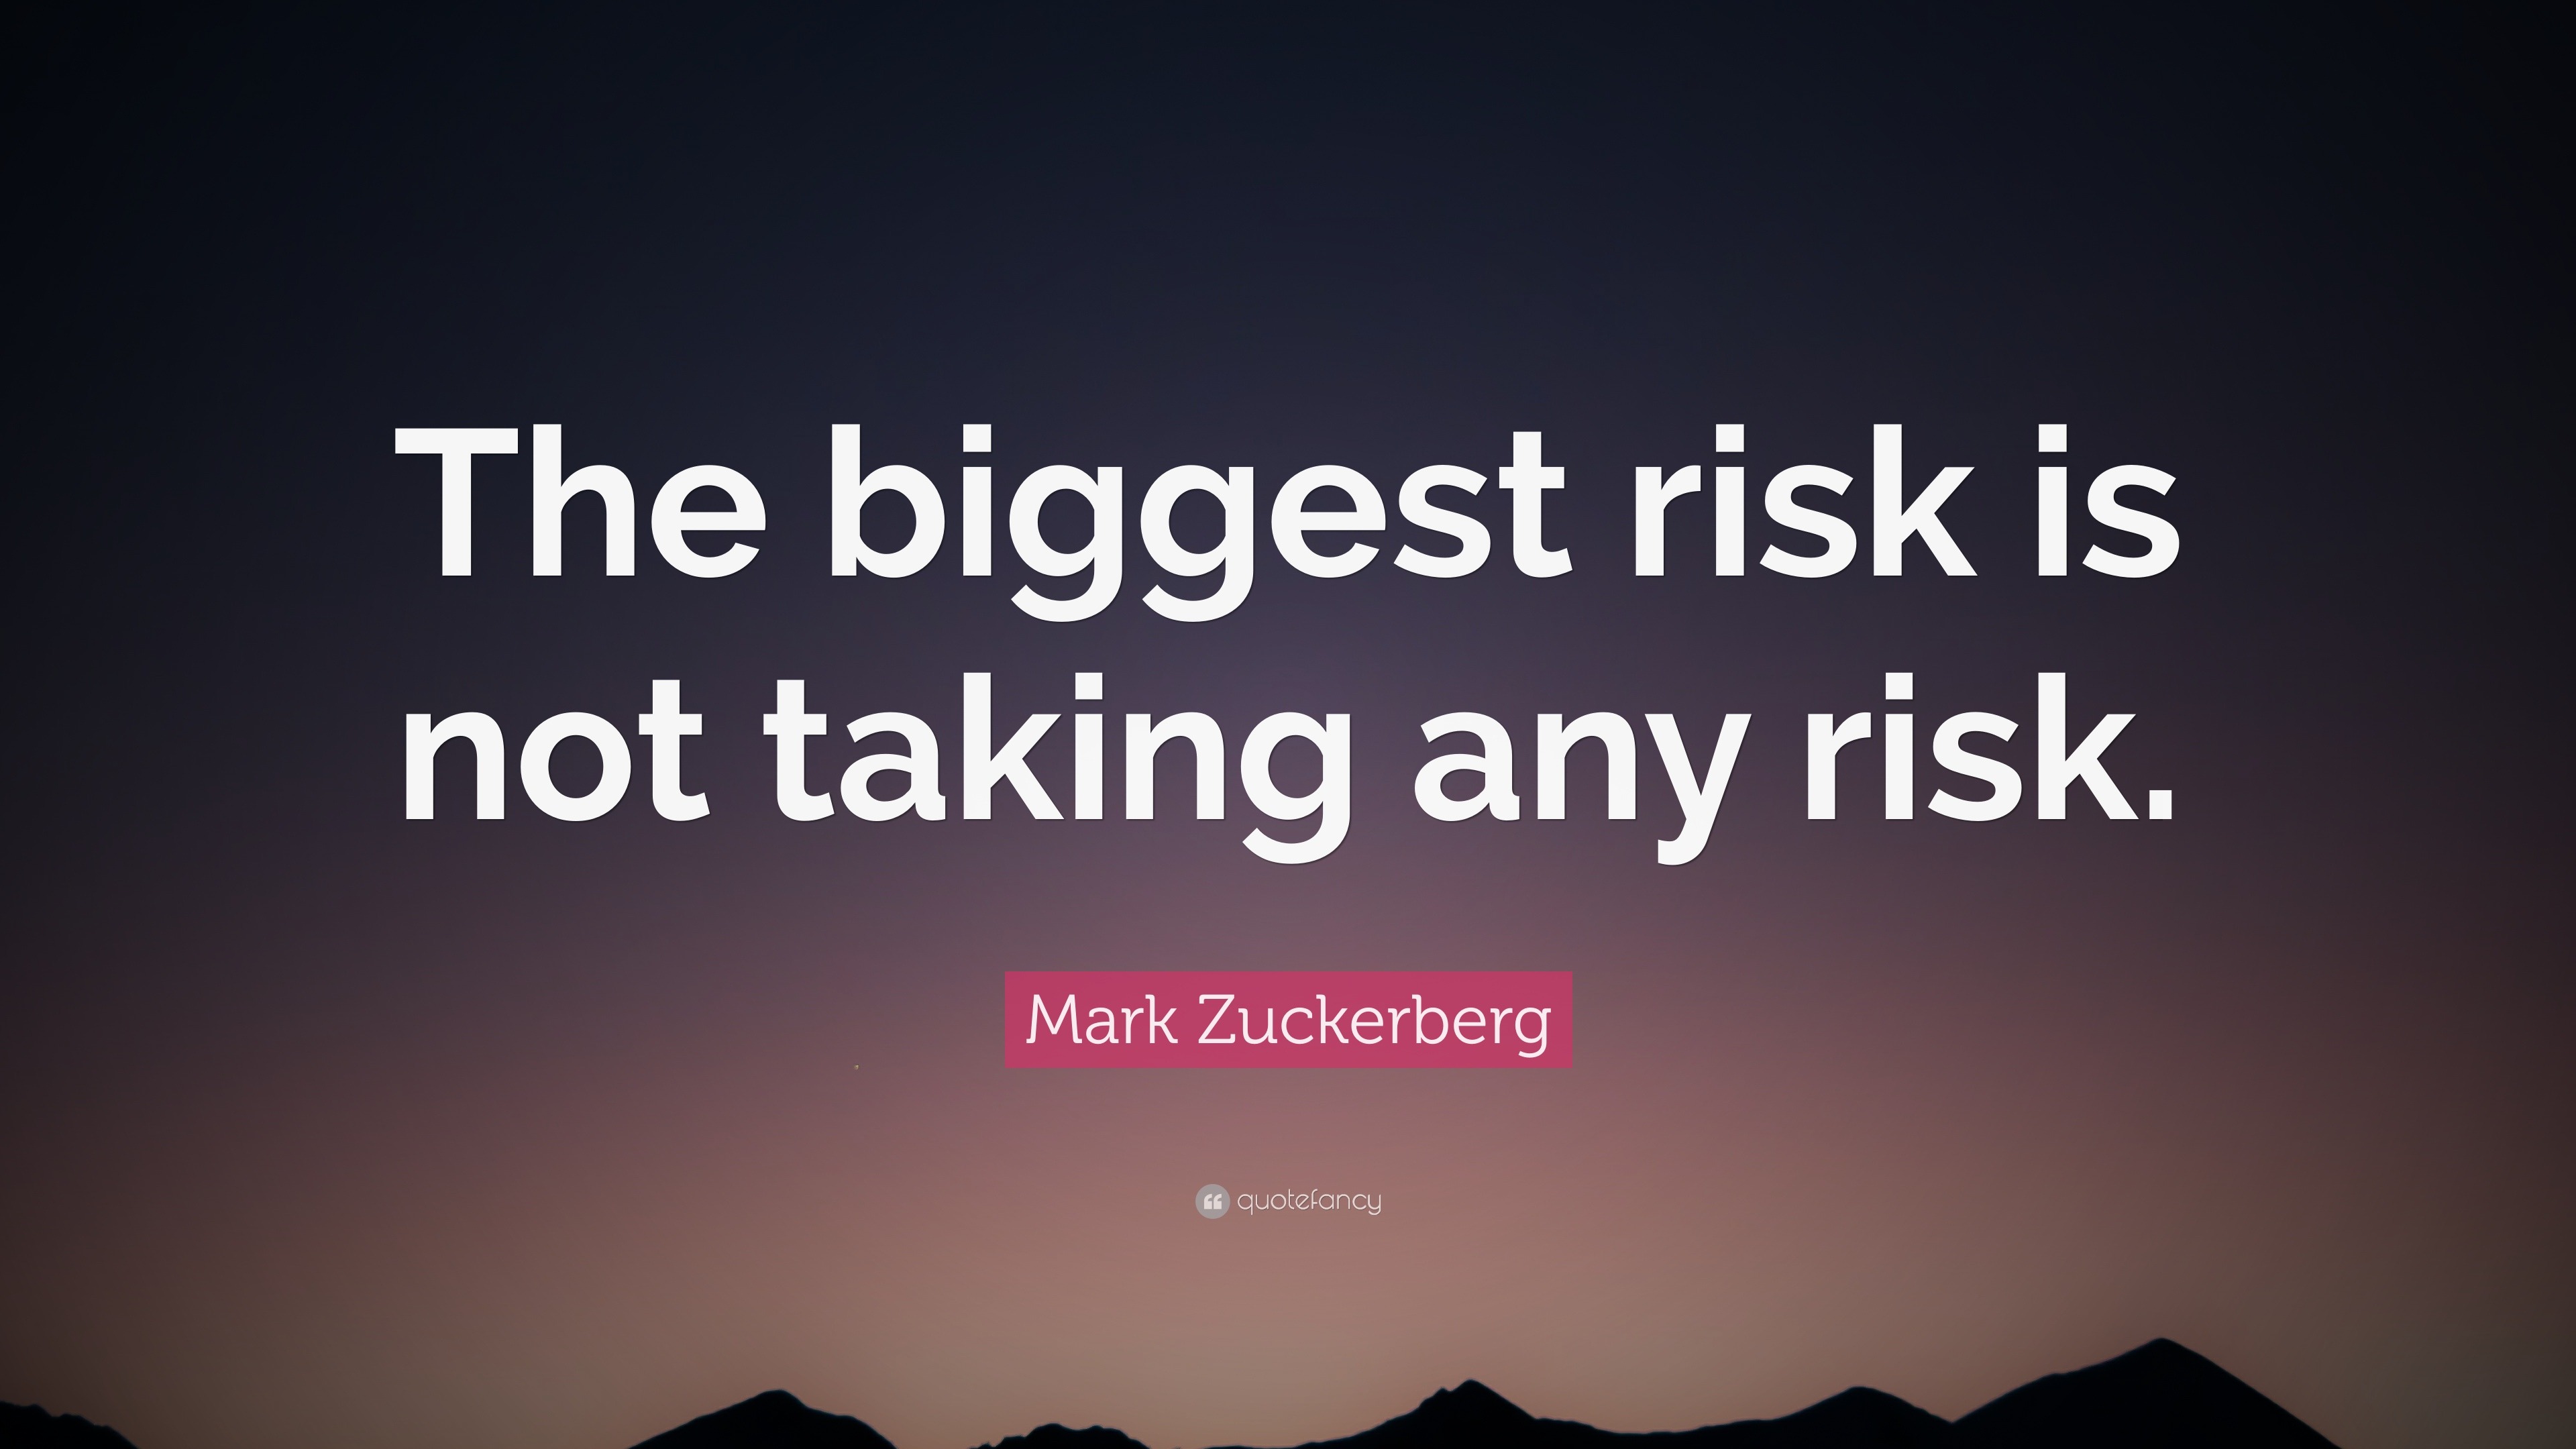 Mark Zuckerberg Quote “The biggest risk is not taking any